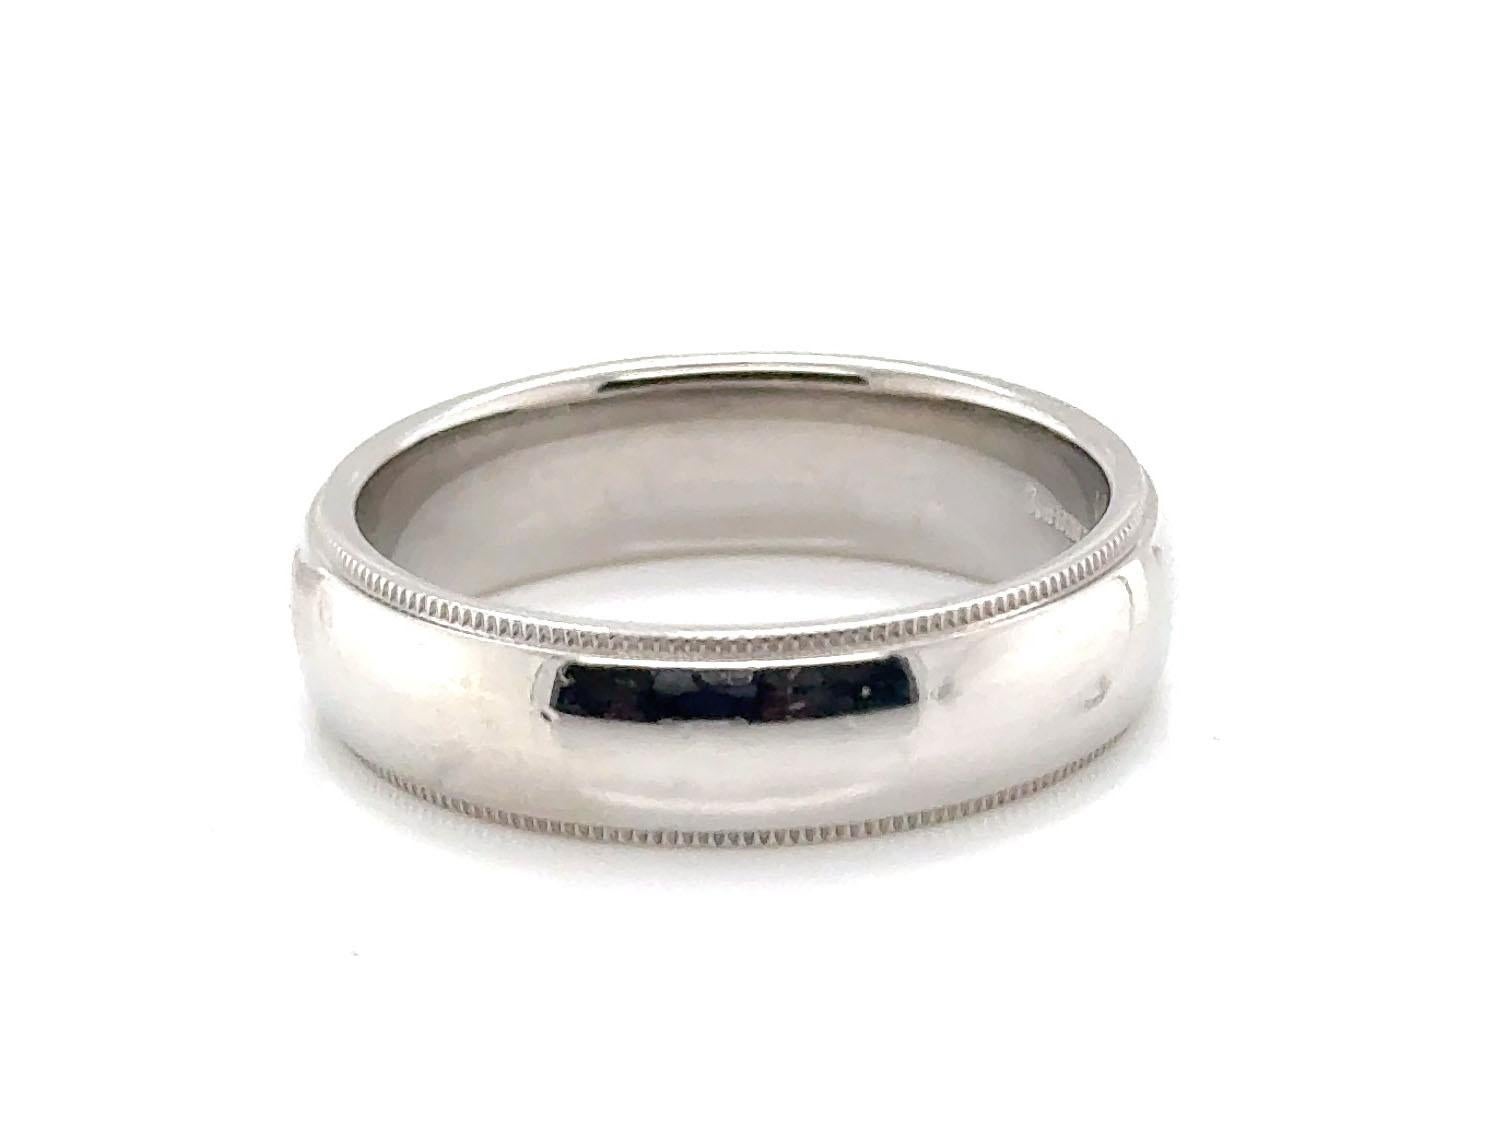 Tiffany & Co Together Milgrain Wedding Band Ring Platinum Mens 6 MM Size 10


100% Authentic Tiffany & Co. Together Milgrain Motif 6MM Band

Original MSRP was $2,400

Check Out the Tiffany Hallmarks 

6 mm wide, properly hallmarked with the Tiffany